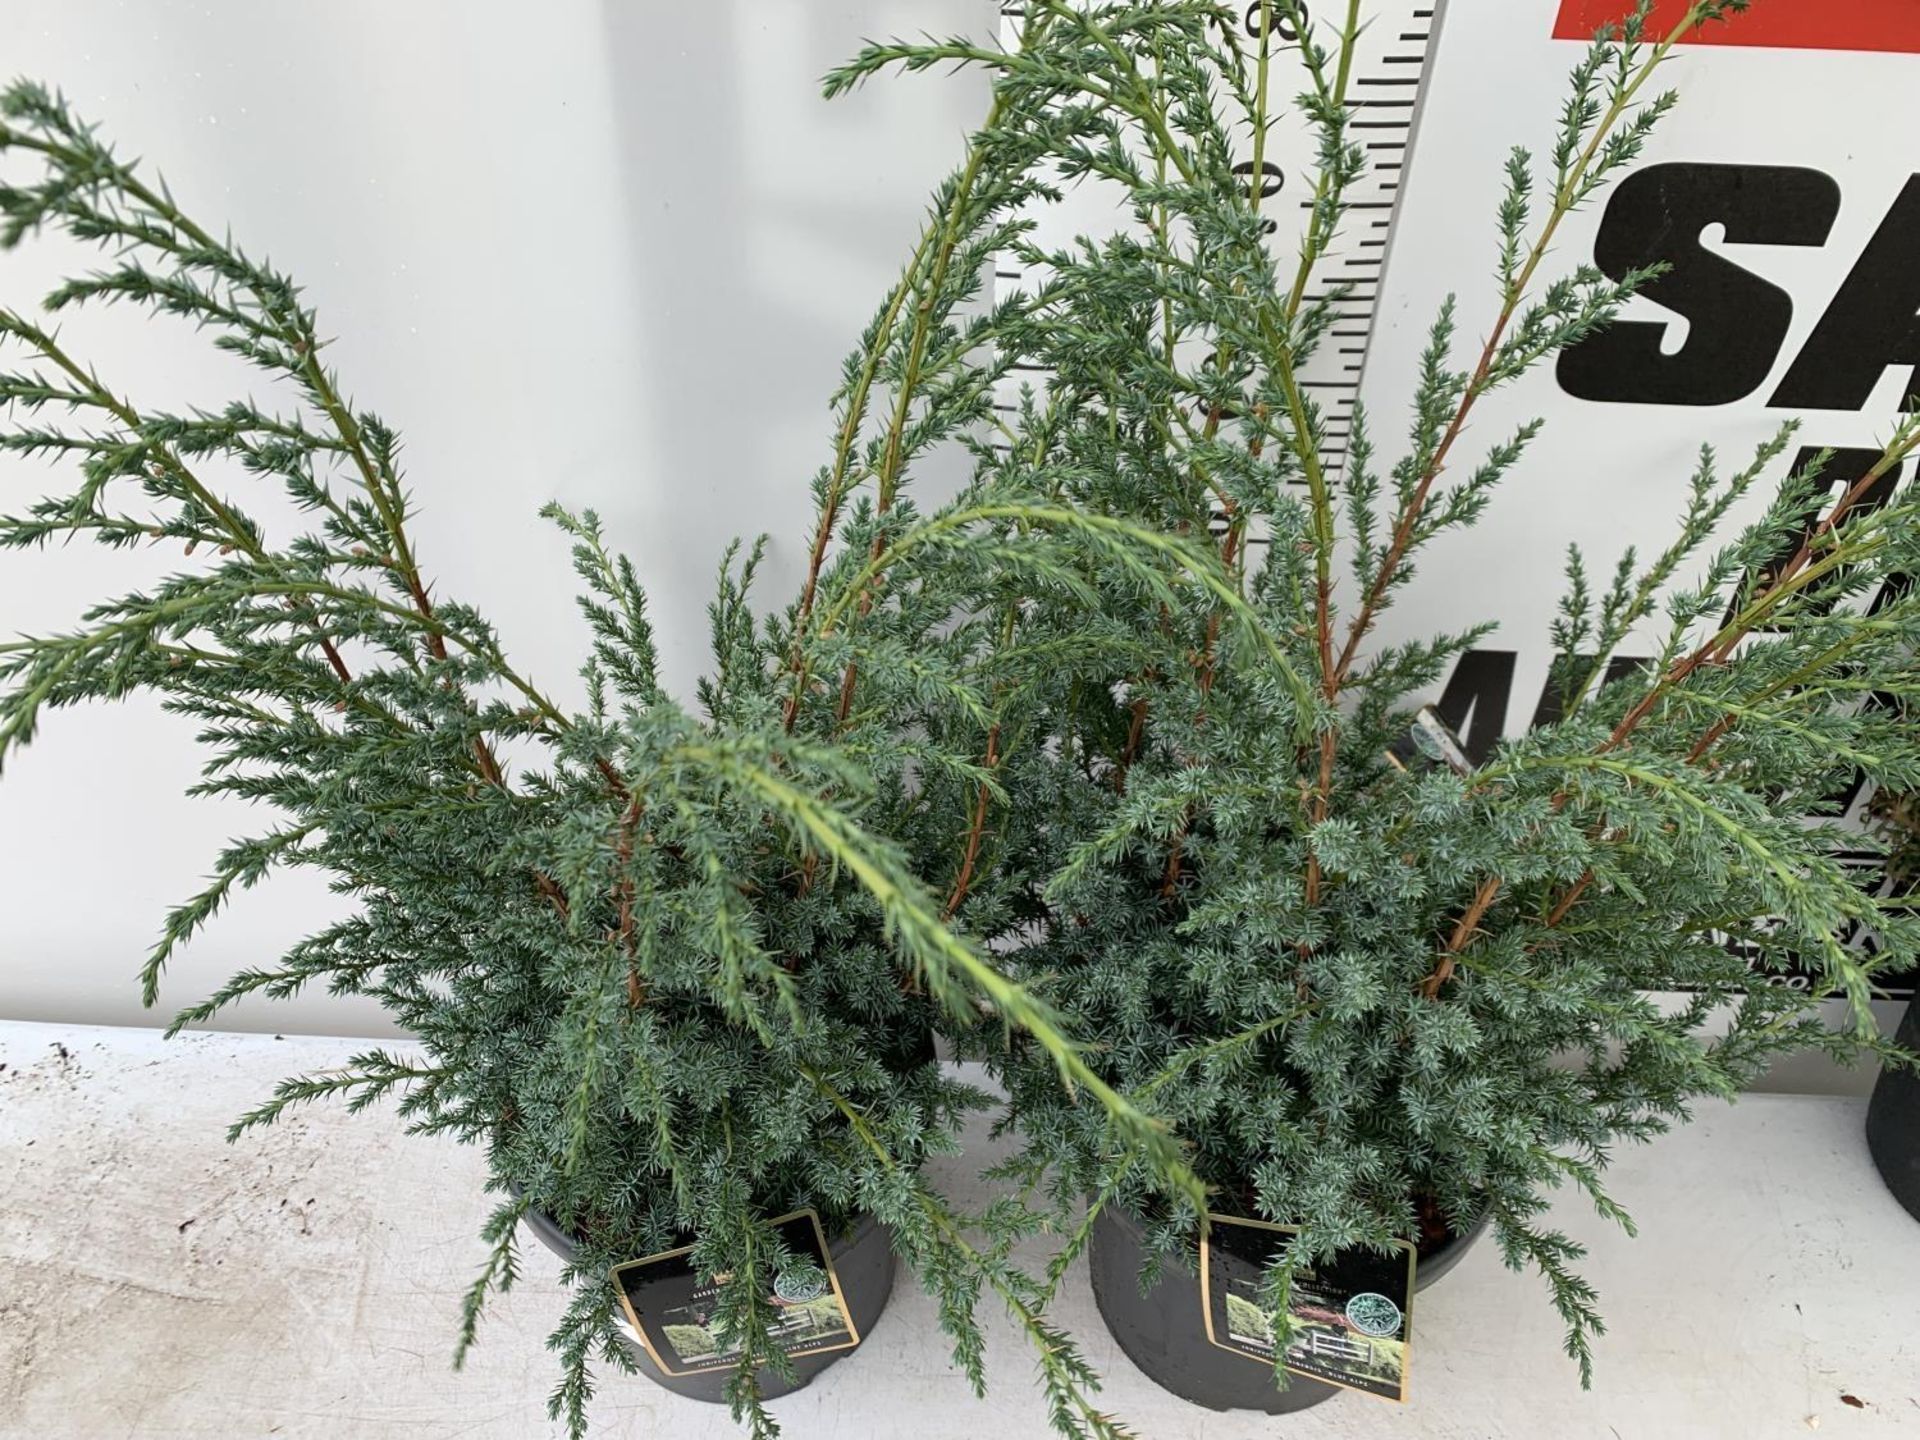 TWO JUNIPERUS CHINENSIS BLUE ALPS IN 7 LTR POTS A METRE IN HEIGHT PLUS VAT TO BE SOLD FOR THE TWO - Image 6 of 11